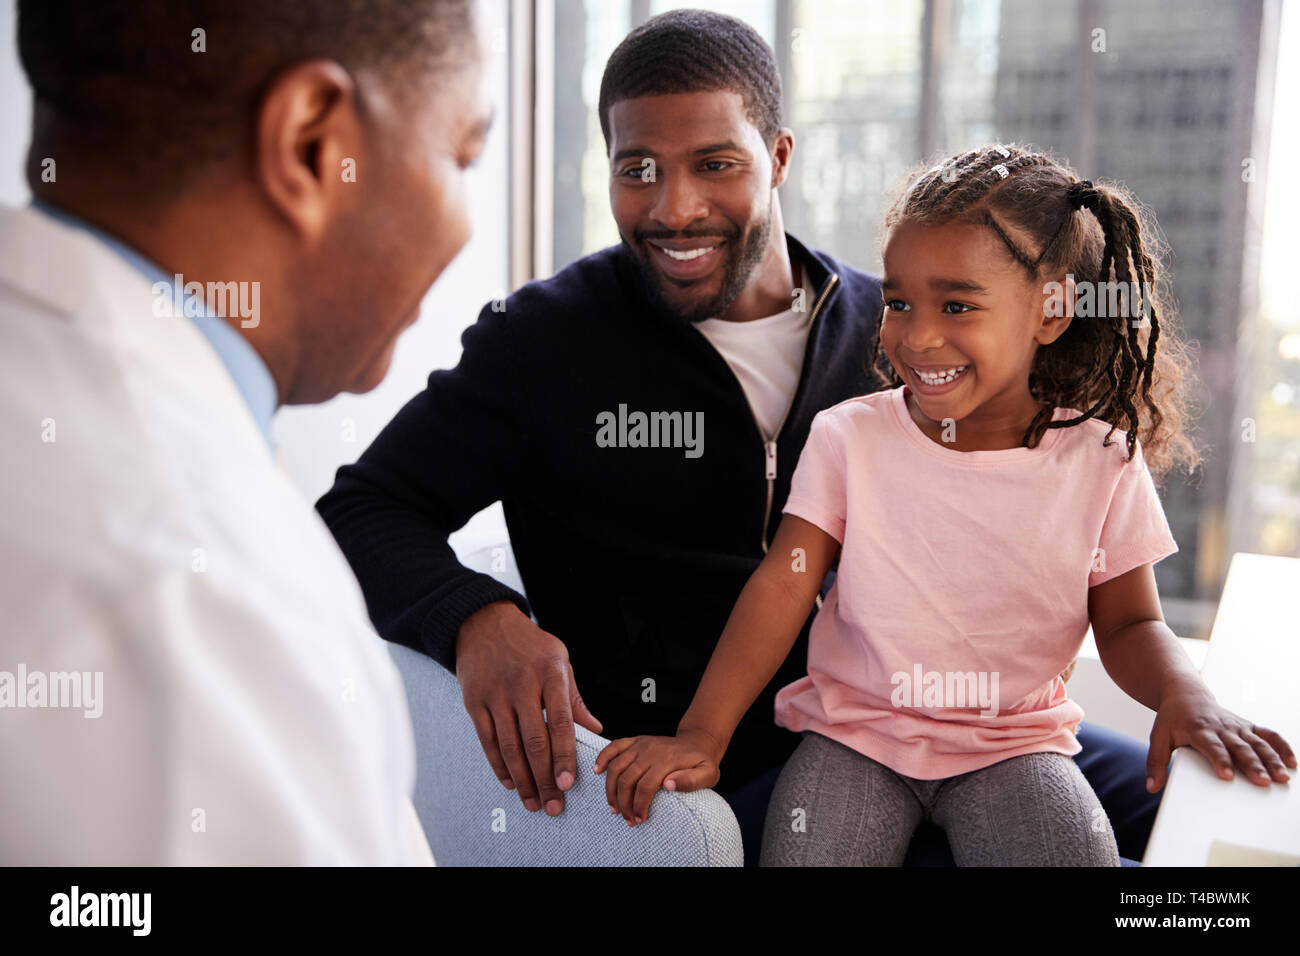 Father And Daughter Having Consultation With Female Pediatrician In Hospital Office Stock Photo